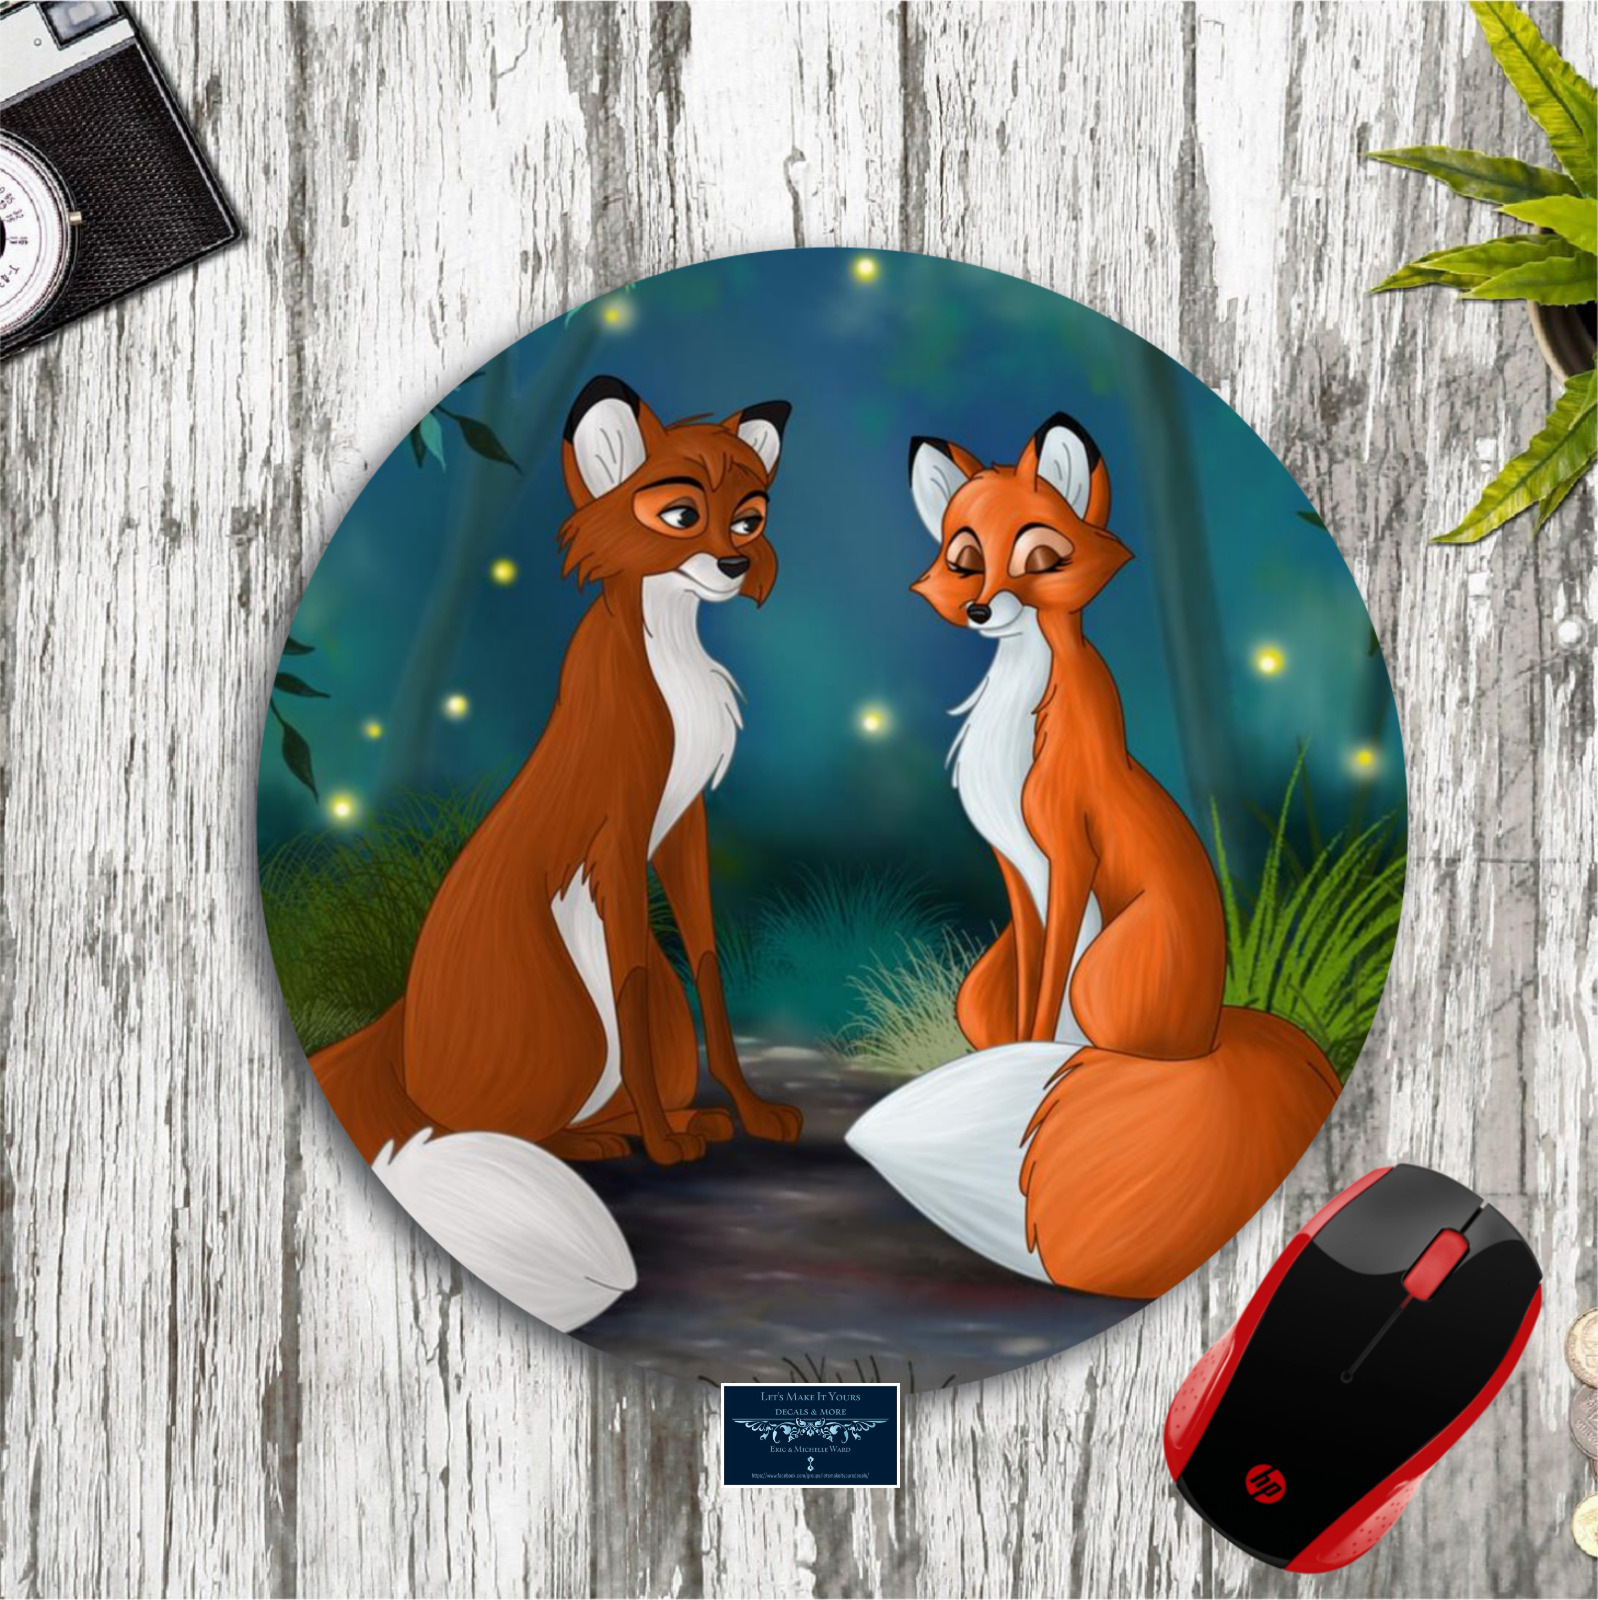 FOX & THE HOUND TODD VIXEY DISNEY INSPIRED ART ROUND MOUSE PAD DESK MAT PC GIFT